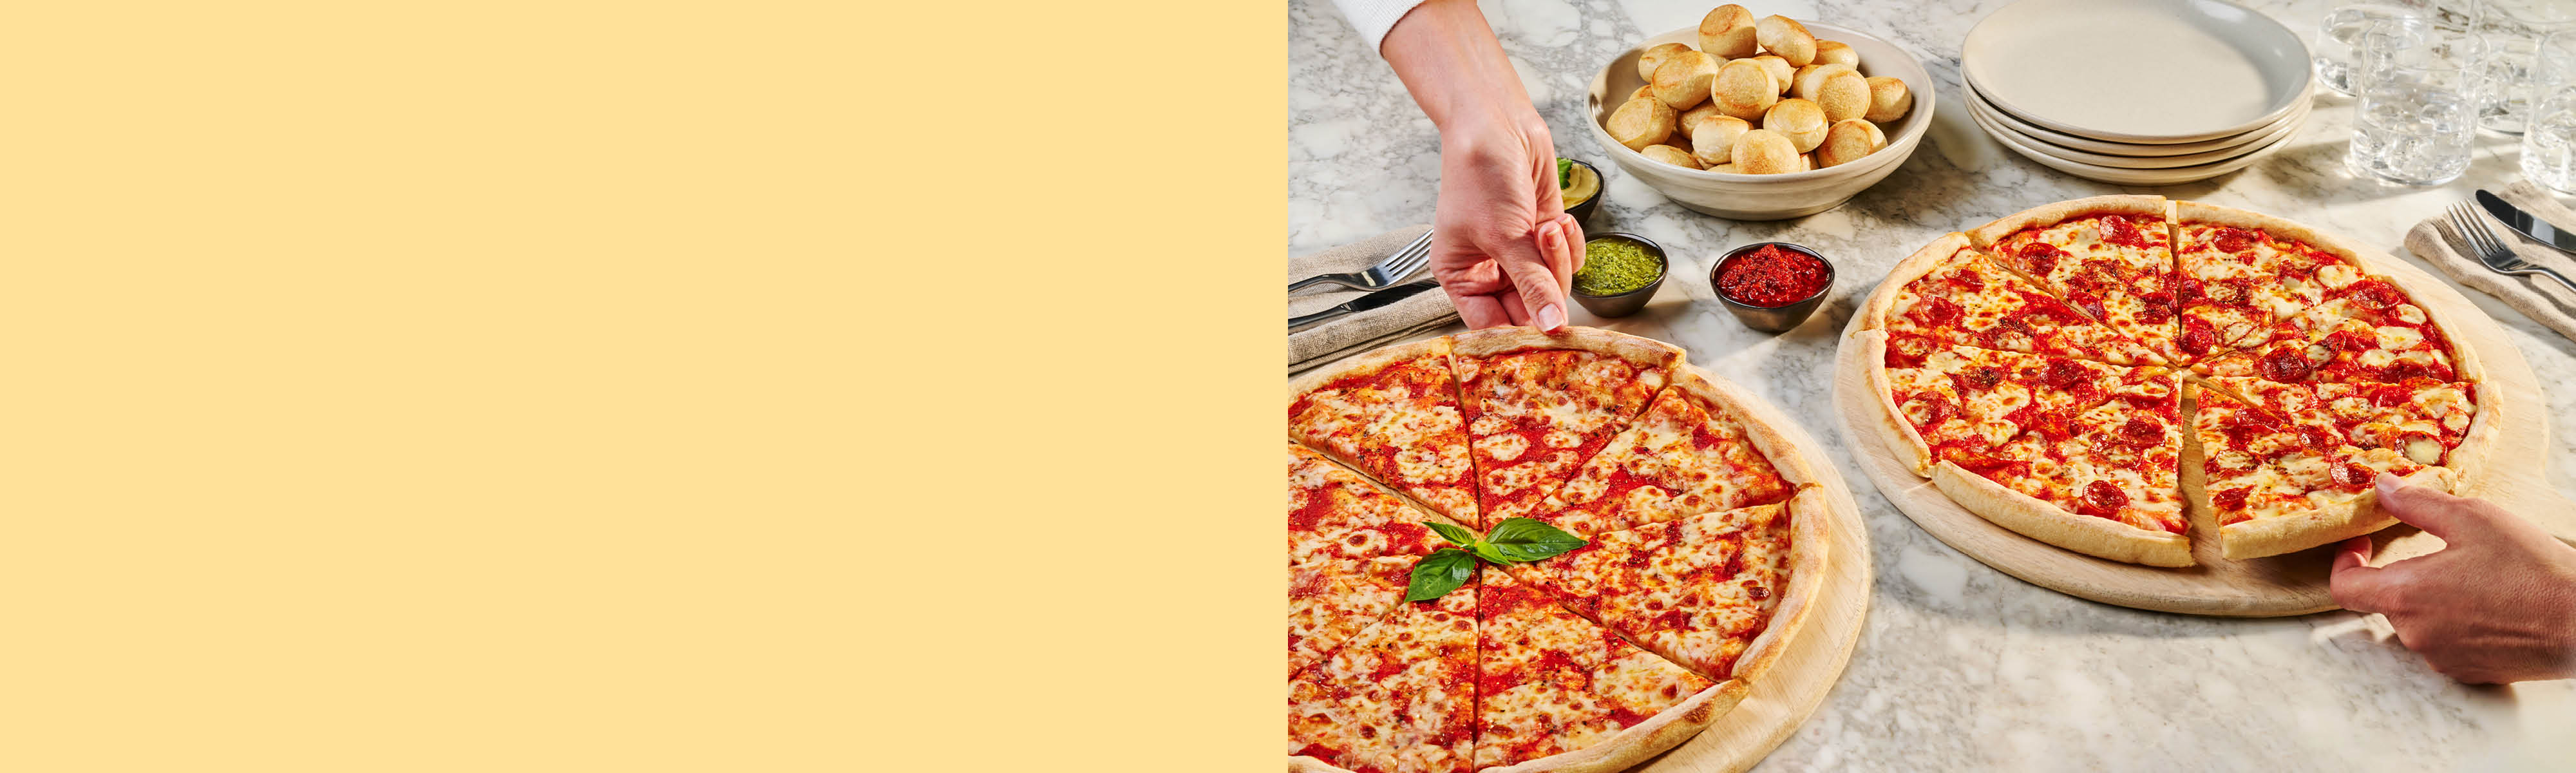 Pizza Express - Classic Large Pizzas